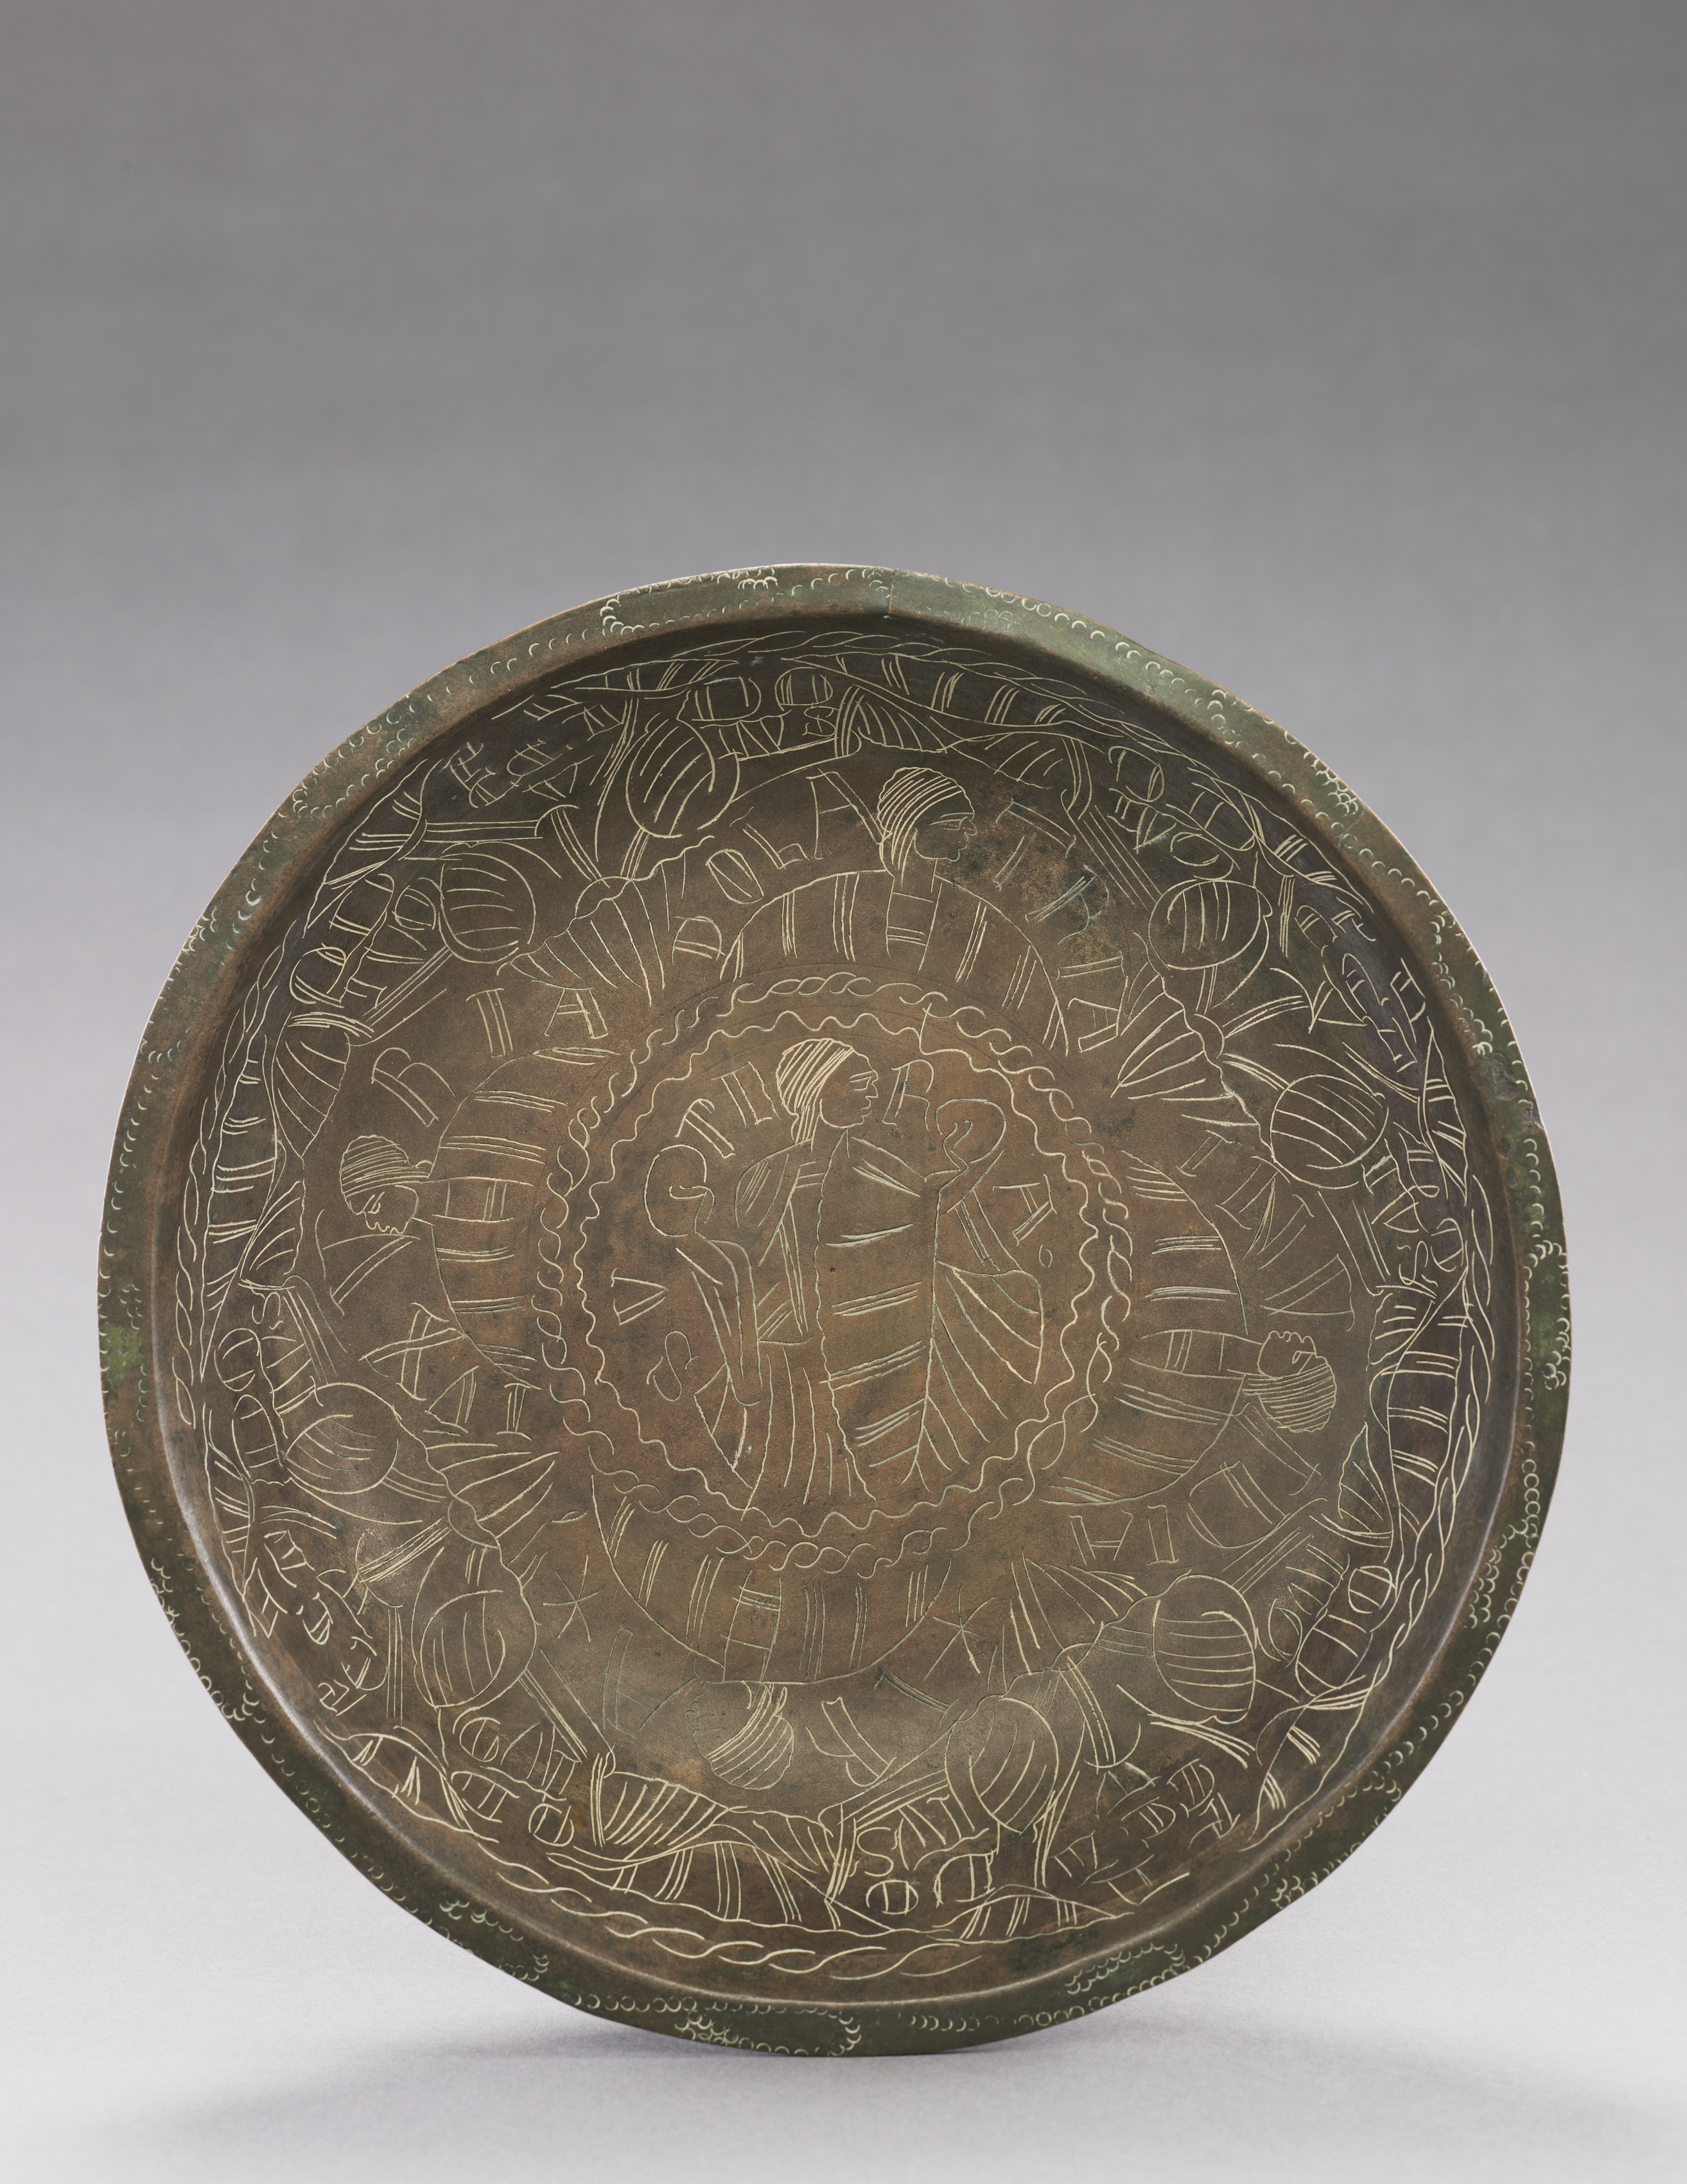 Bowl with Engraved Figures of Vices